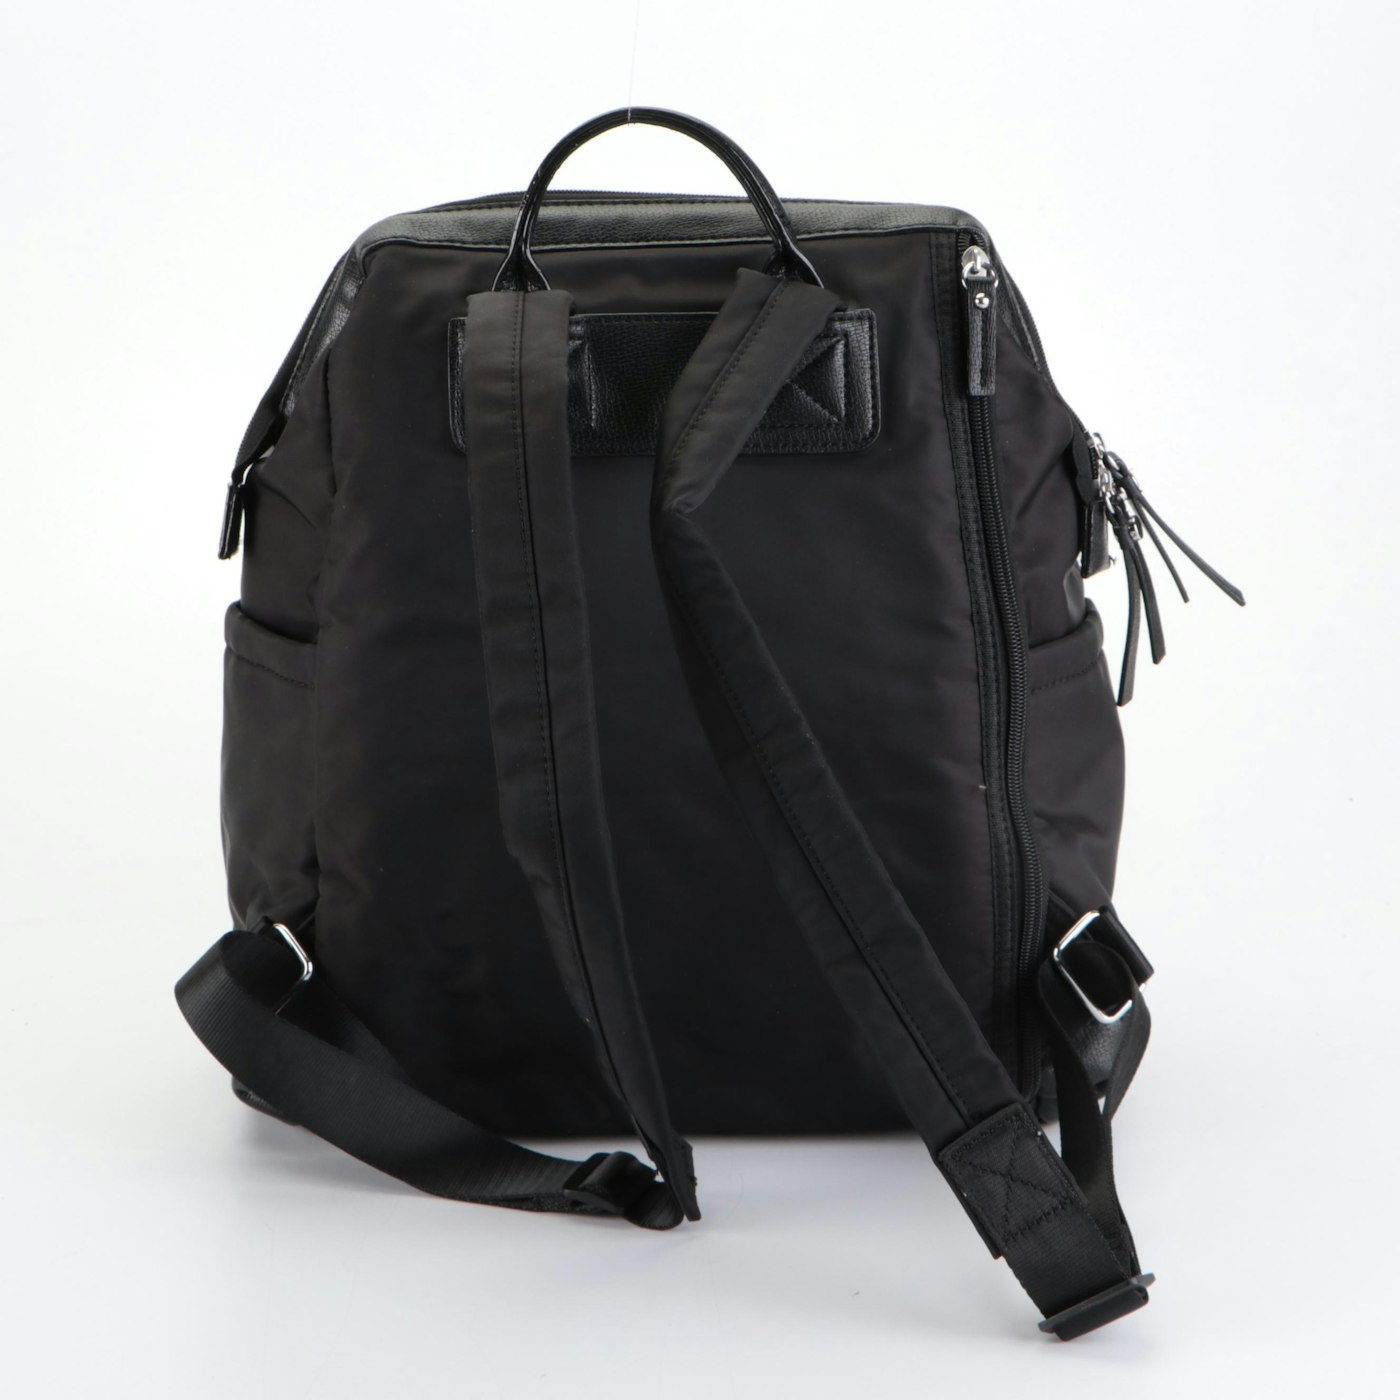 Tutilo Backpack in Black Nylon and Black Faux Leather Trim | EBTH